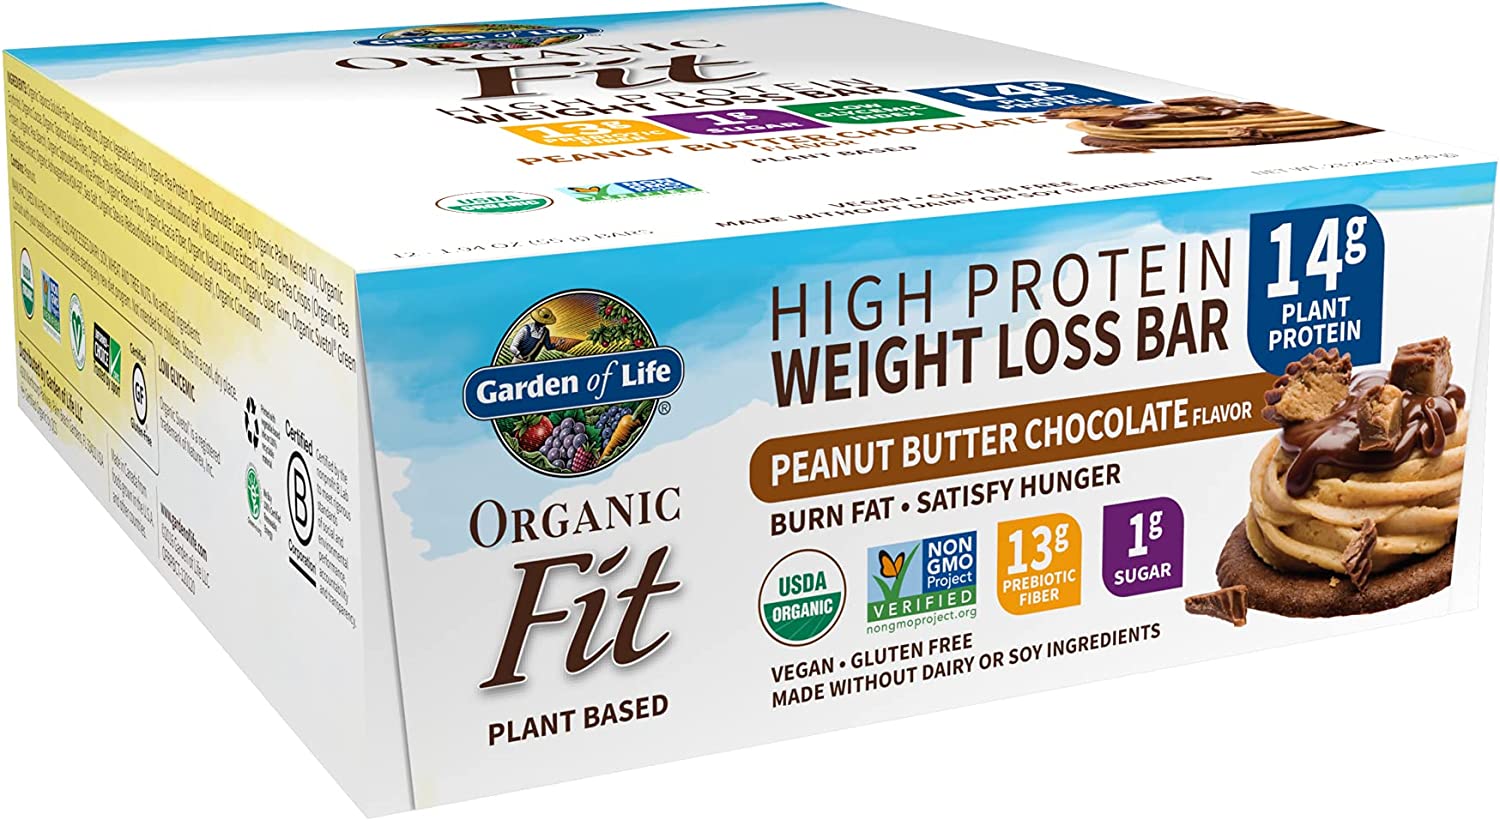 High Protein Bars for Weight Loss – Garden of Life Organic Fit Bar – Peanut Butter Chocolate (12 per carton) – Burn Fat, Satisfy Hunger and Fight Cravings, Low Sugar Plant Protein Bar with Fiber